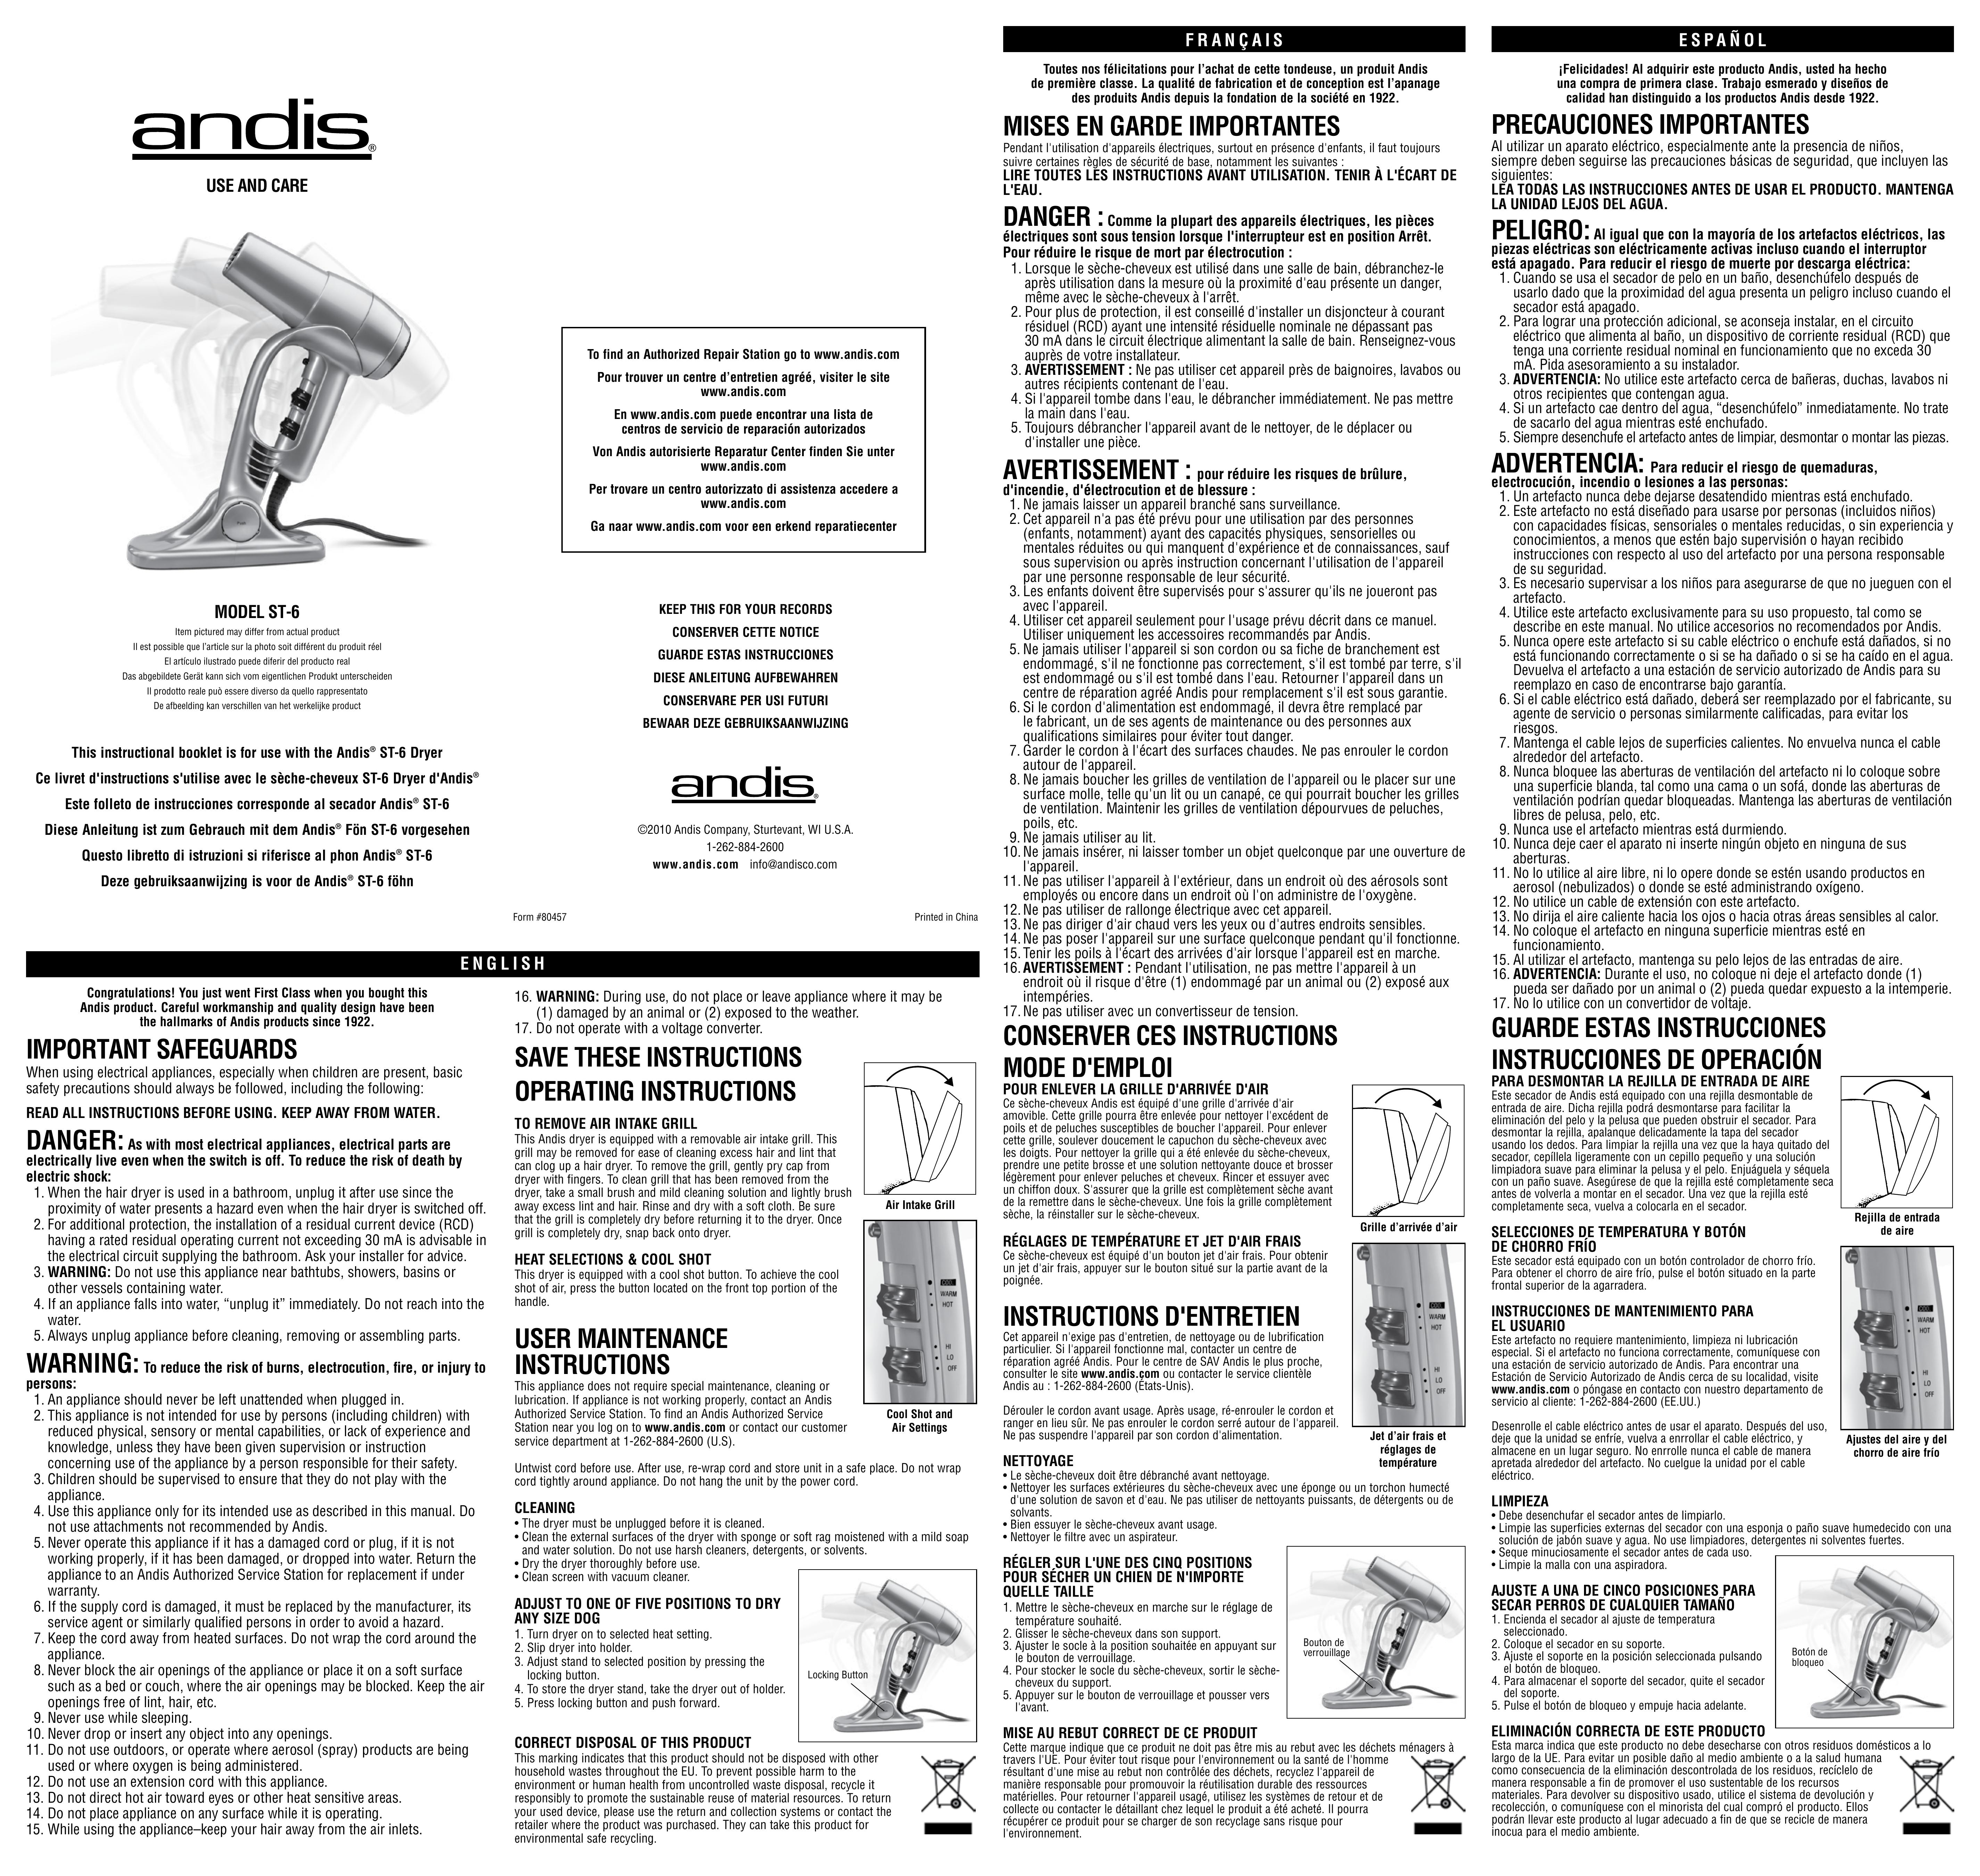 Andis Company ST-6 Hair Dryer User Manual